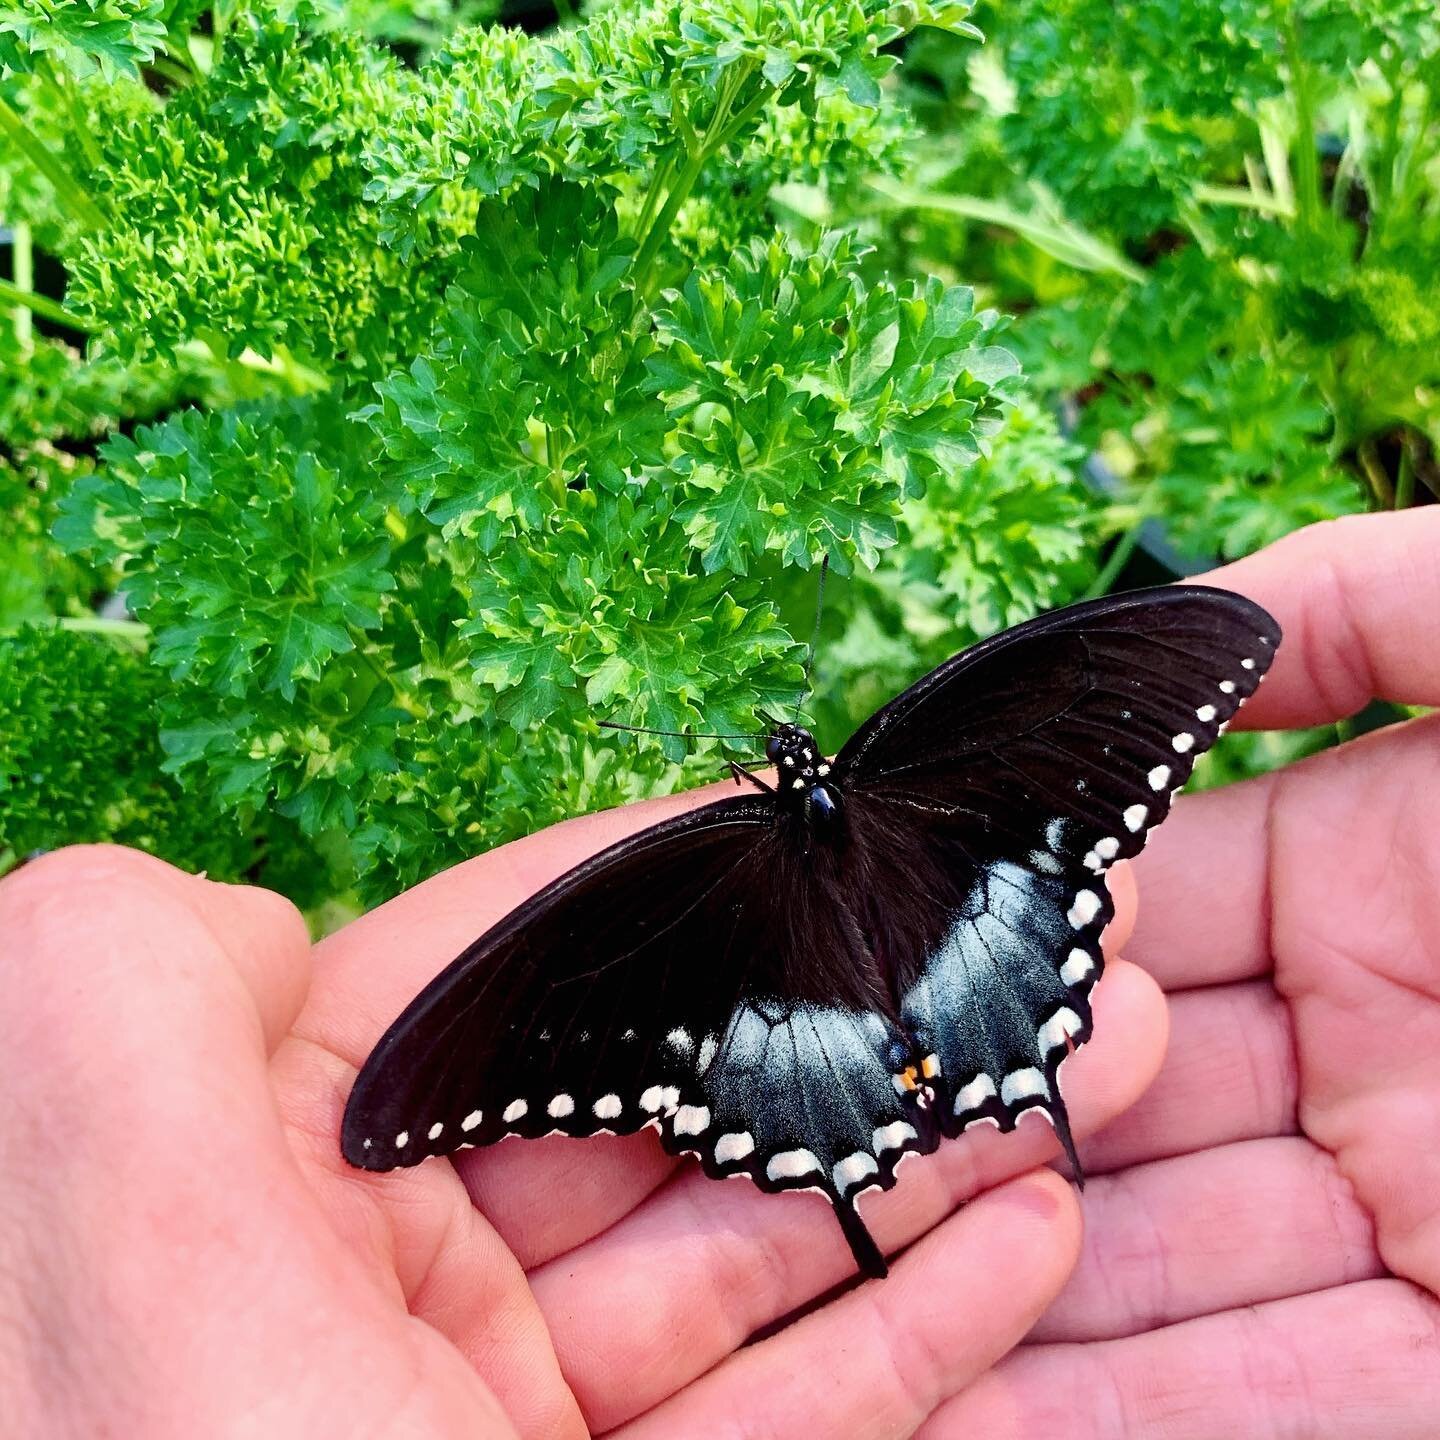 Don&rsquo;t like parsley? That&rsquo;s okay&mdash;swallowtail butterflies do! 🦋🌿

Swallowtails love herbs like dill, parsley, and sweet fennel. They&rsquo;re attracted by these aromatic plants as places to lay their eggs and to provide food for bab